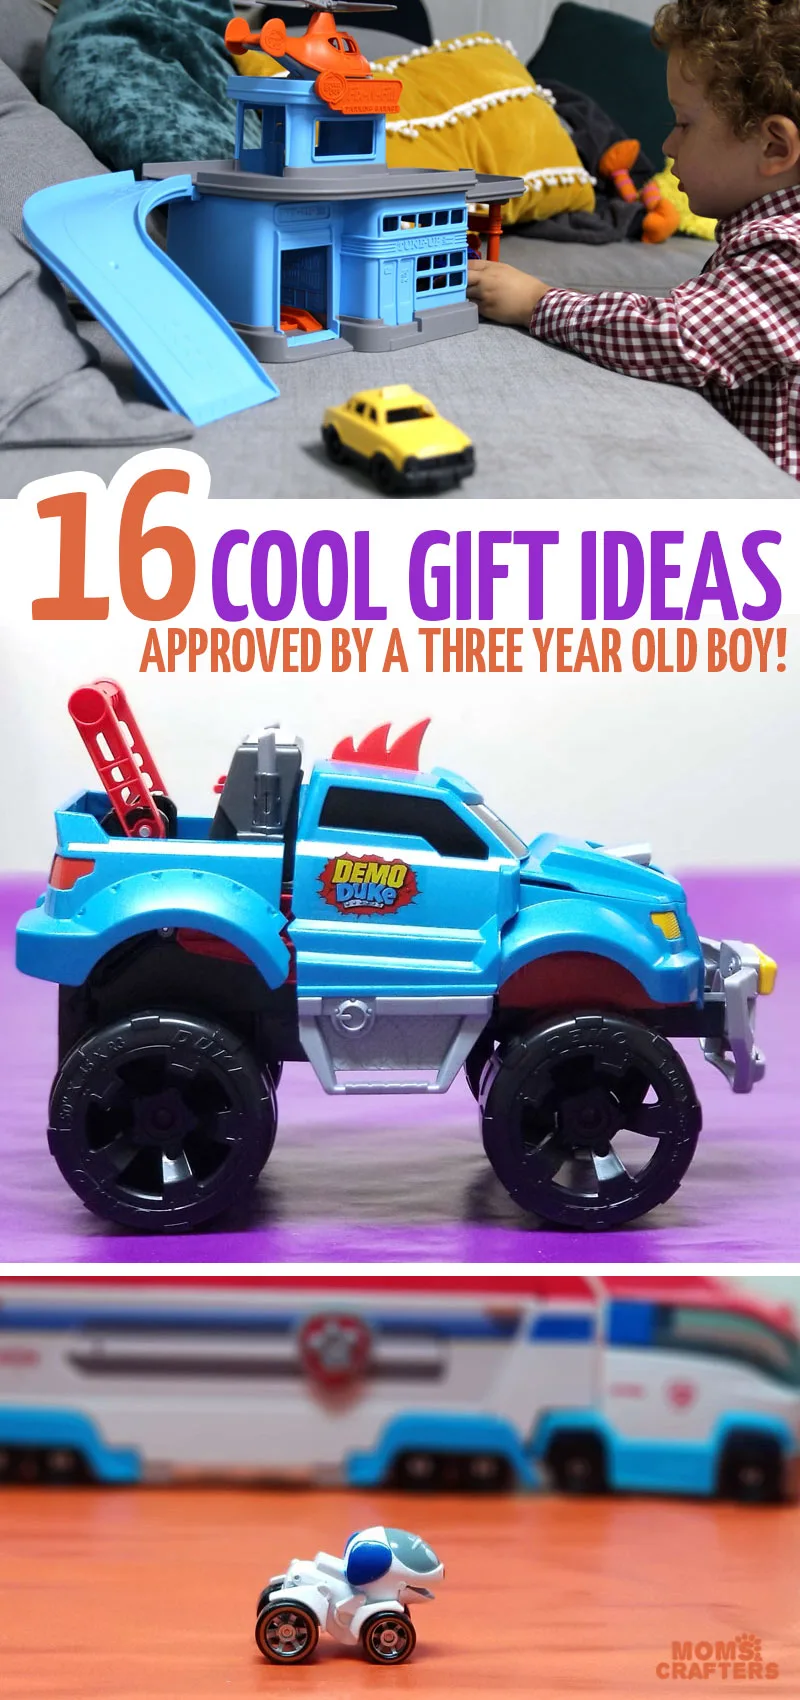 Click for the best birthday gifts for 3 year old boys that make great Christmas gifts and Chanukah gifts for older toddlers too! These sweet toy gift ideas are fun for kids who love cars, Paw Patrol, and anything in between.